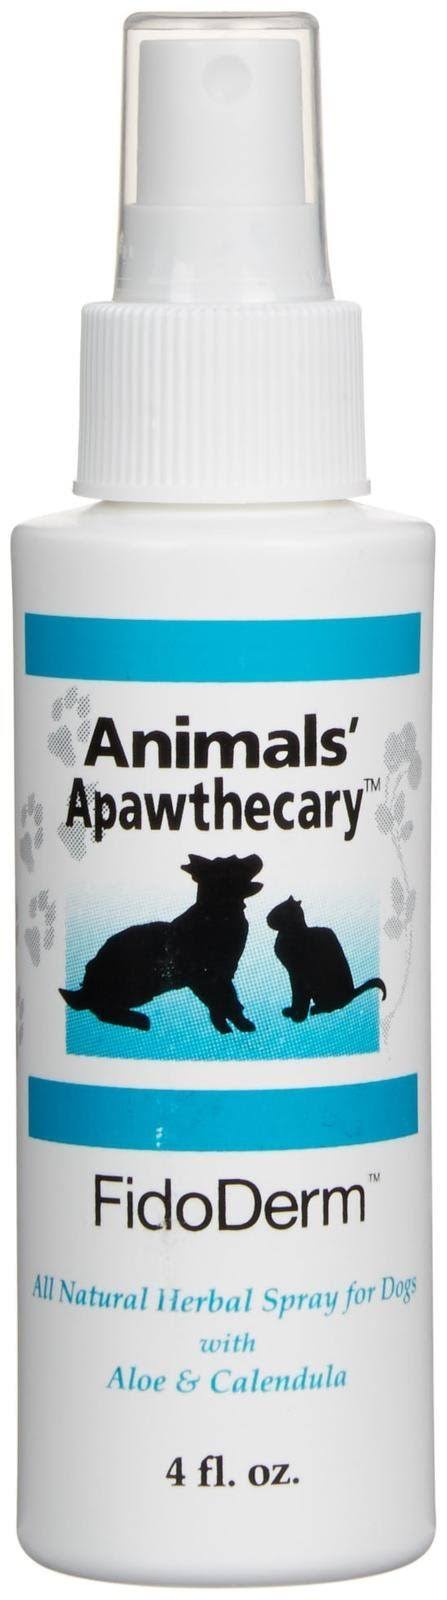 Animals Apawthecary FidoDerm Herbal Skin Spray for Dogs and Cats - 4oz